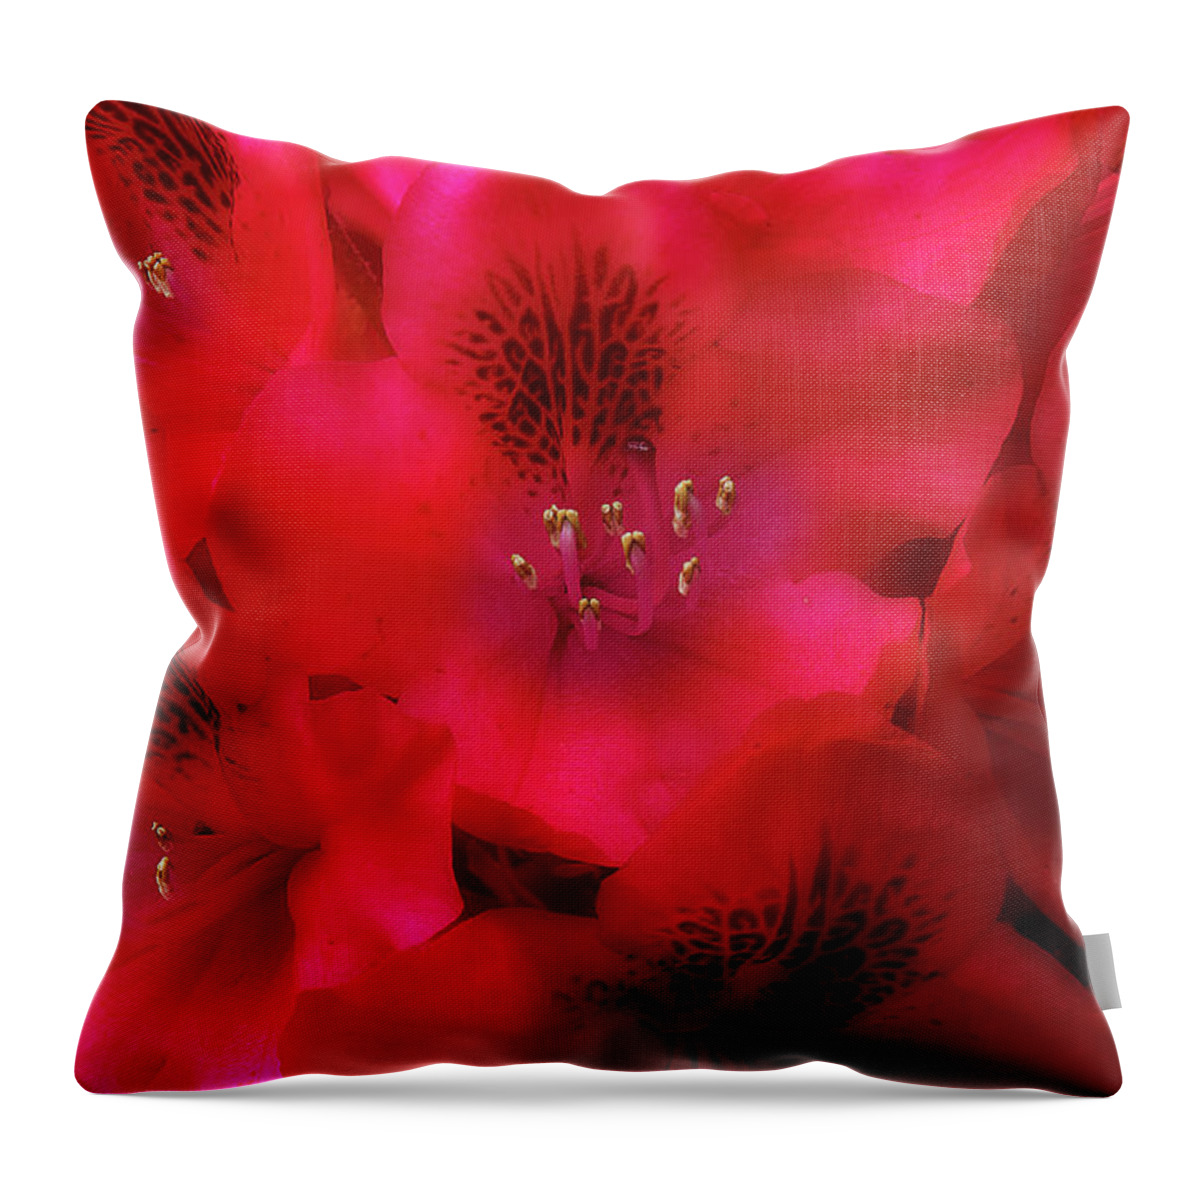 Flowers Throw Pillow featuring the photograph Red Petals by Mike Eingle